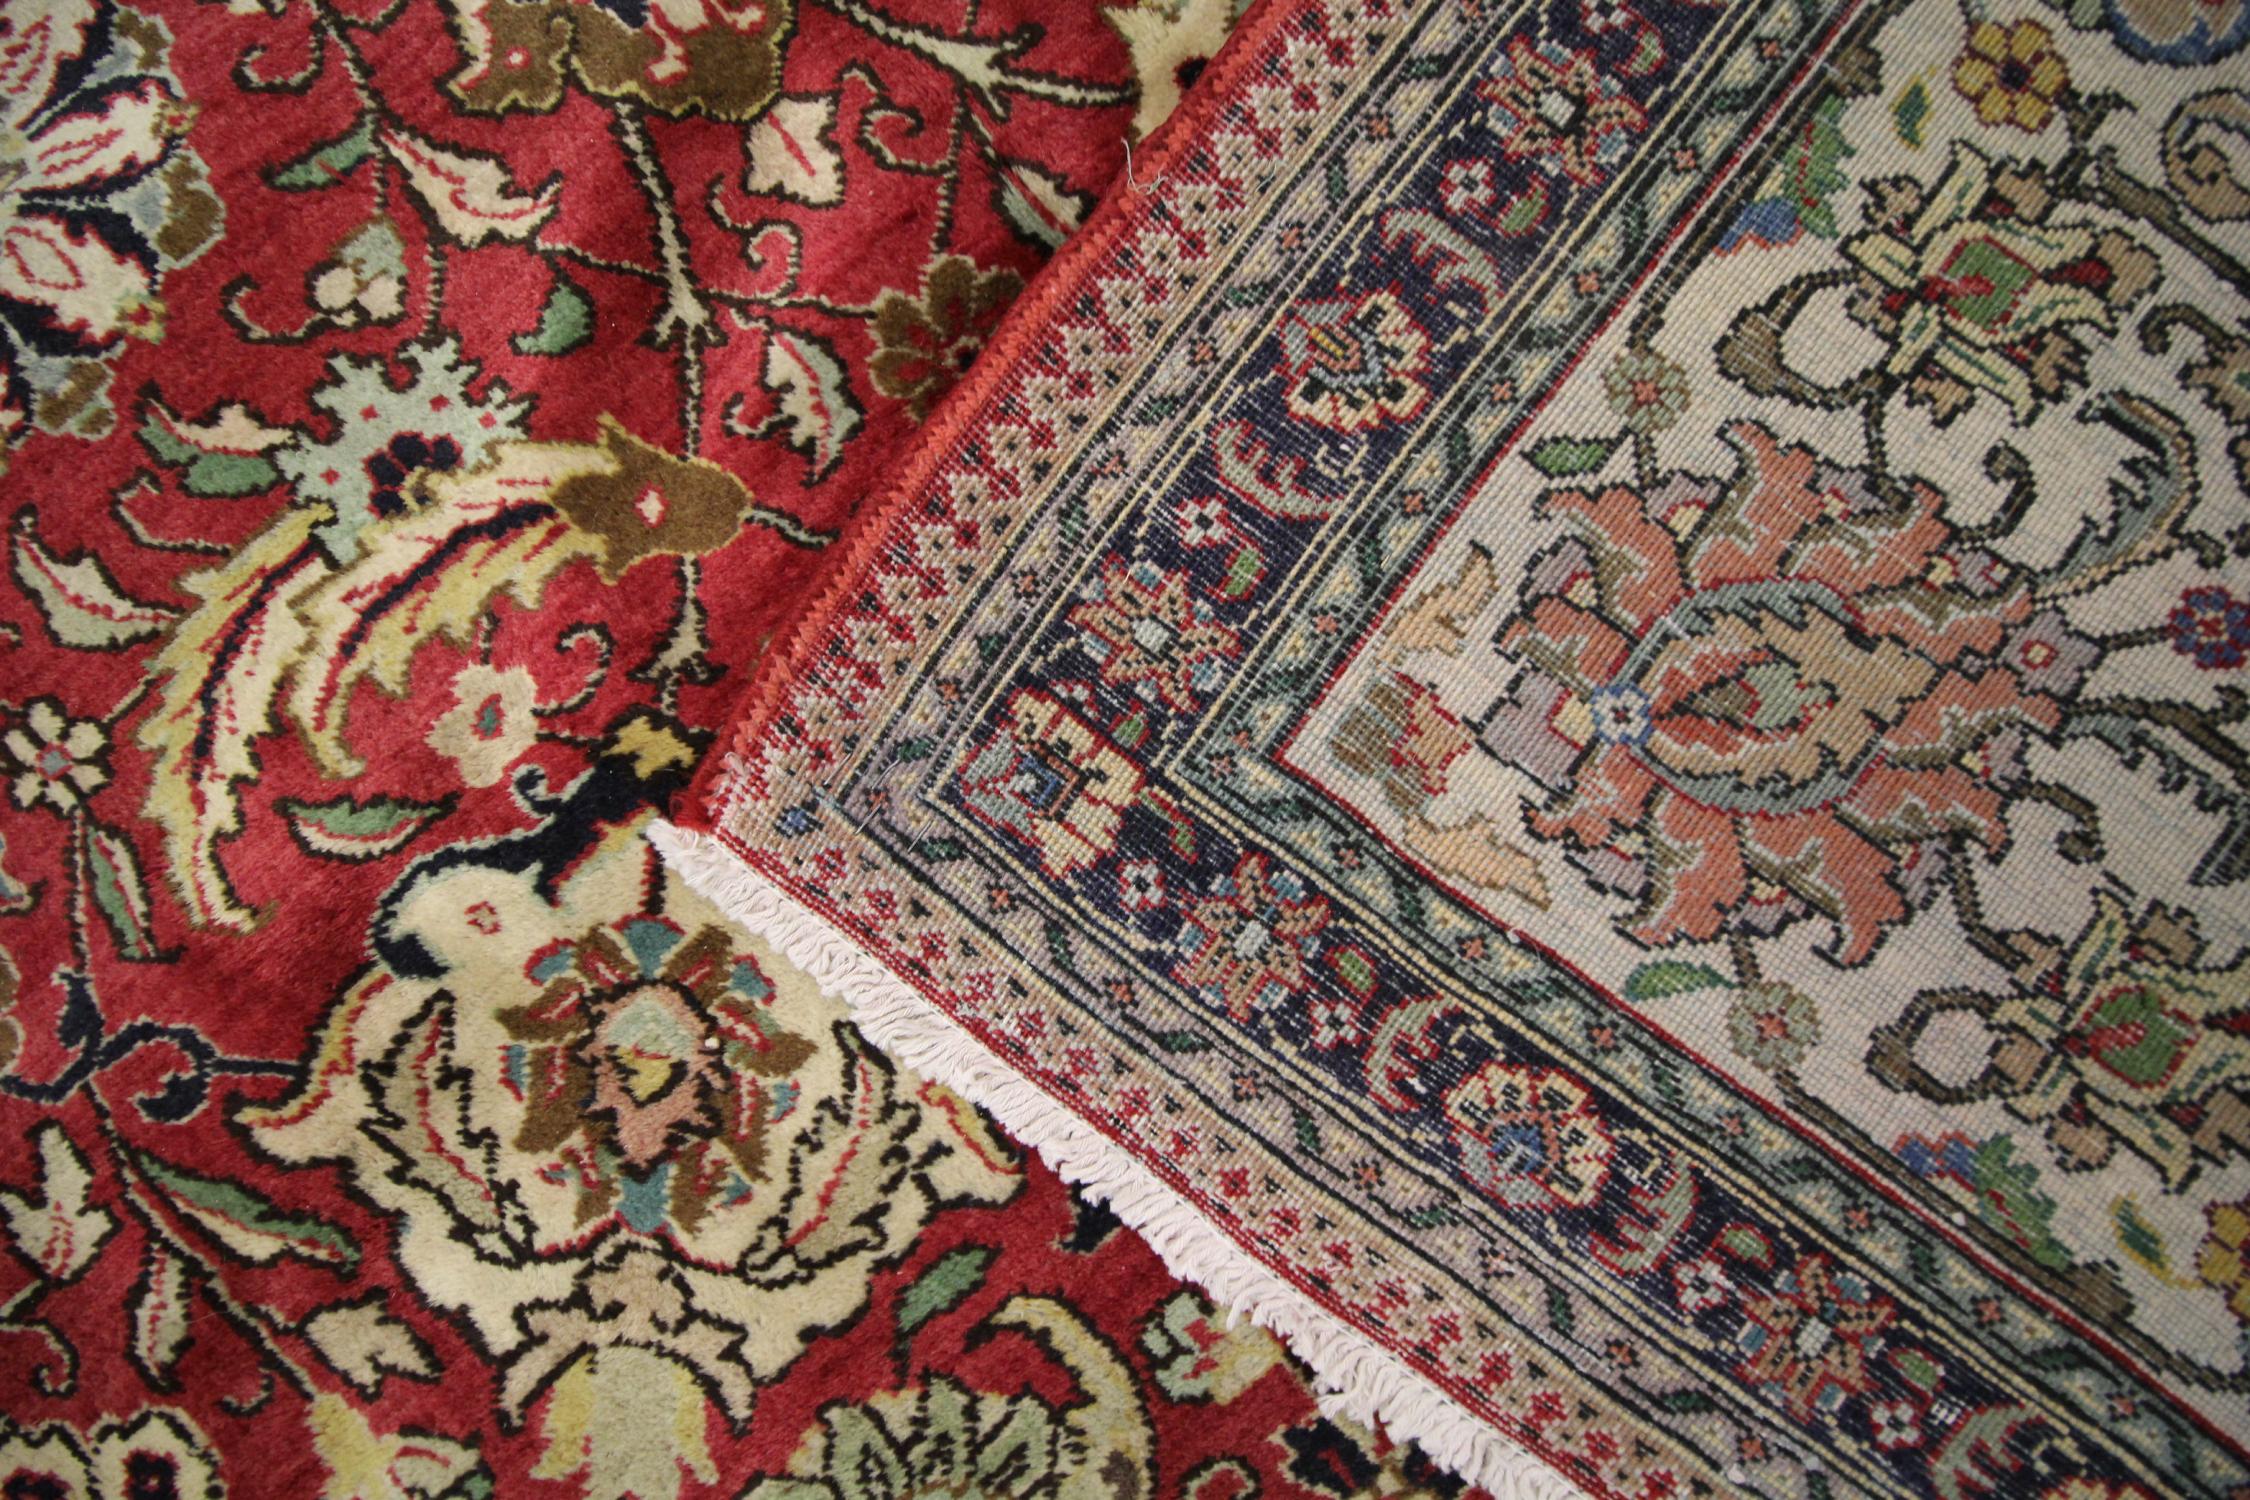 Large Vintage Rugs, Red All Over Carpet, Wool Living Room Rugs for Sale For Sale 5